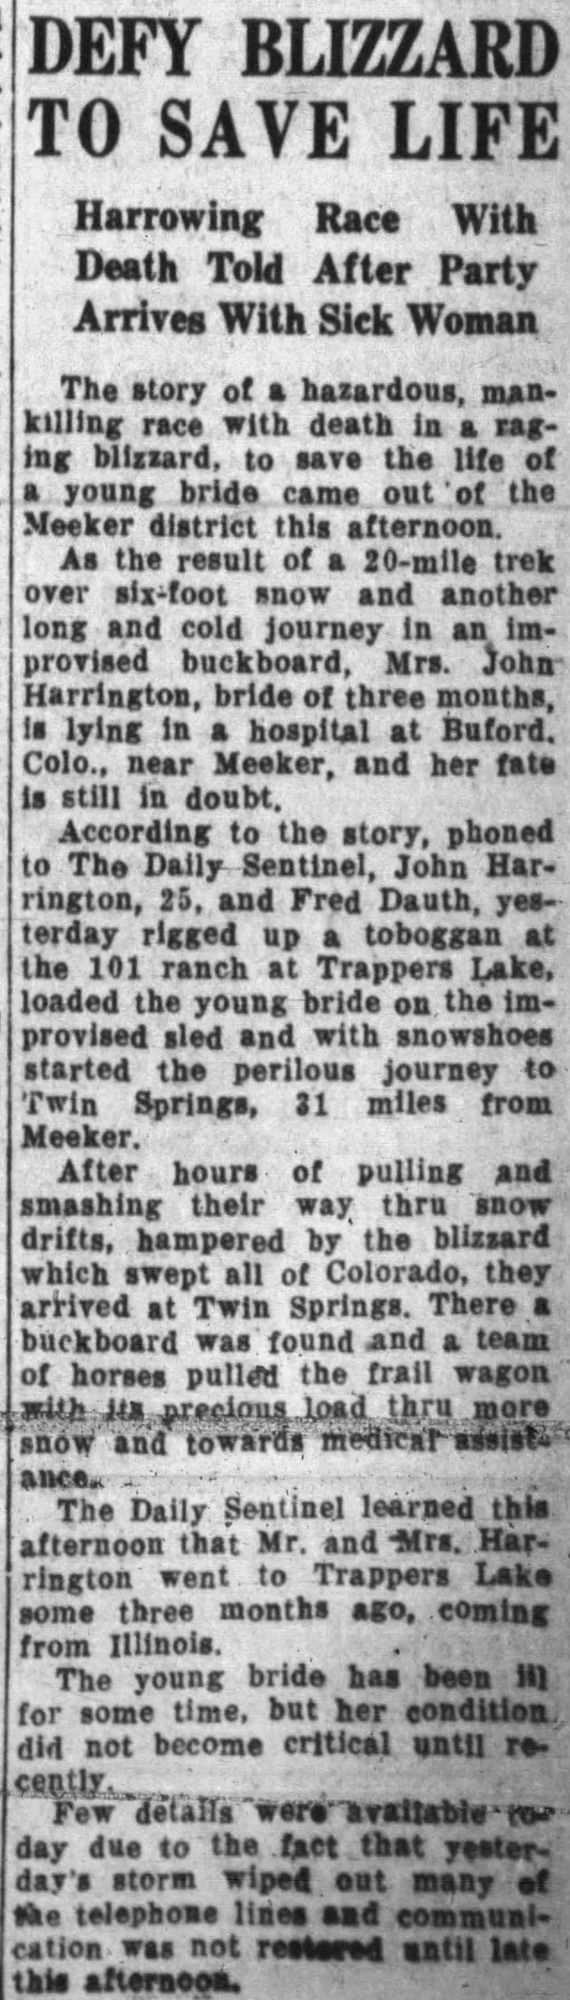 Dauth Family Archive - 1939-02-20 - The Daily Sentinel - Fred Dauth Helps Save A Sick Person During Blizzard